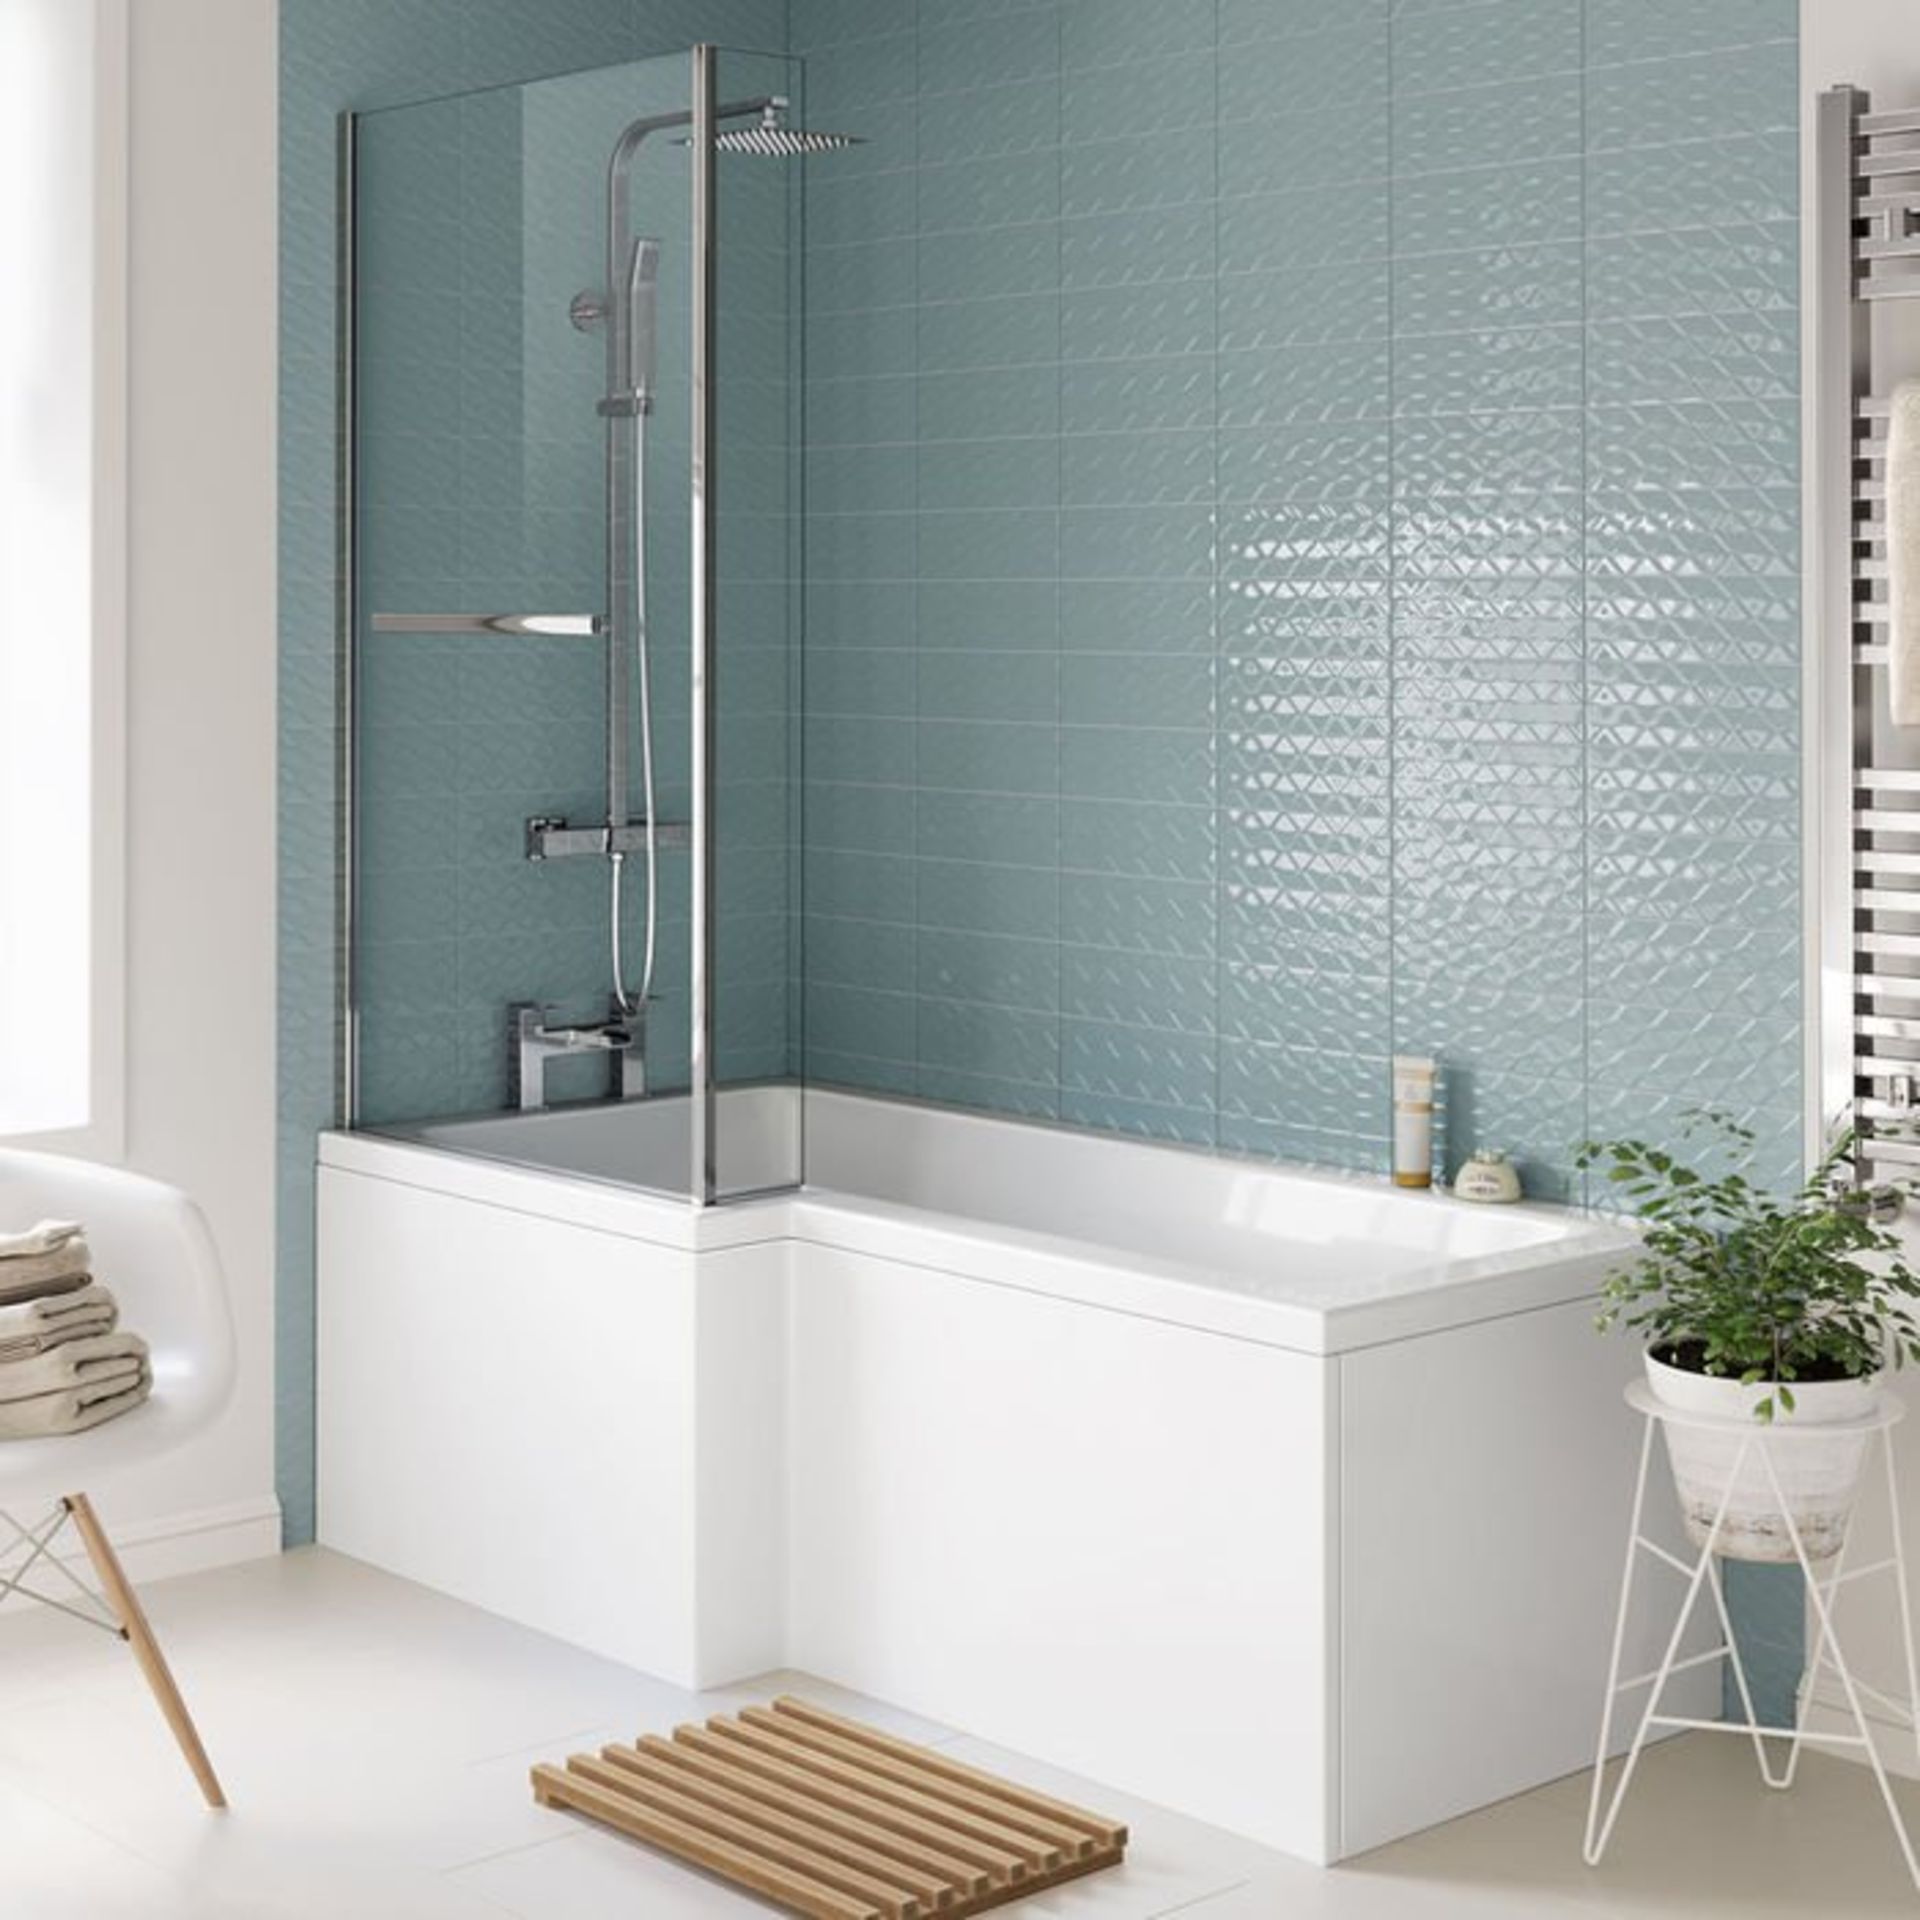 (G22) 805mm - 6mm - EasyClean L Shape Bath Screen & Towel Rail RRP £224.99 6mm Tempered Saftey Glass - Image 2 of 3